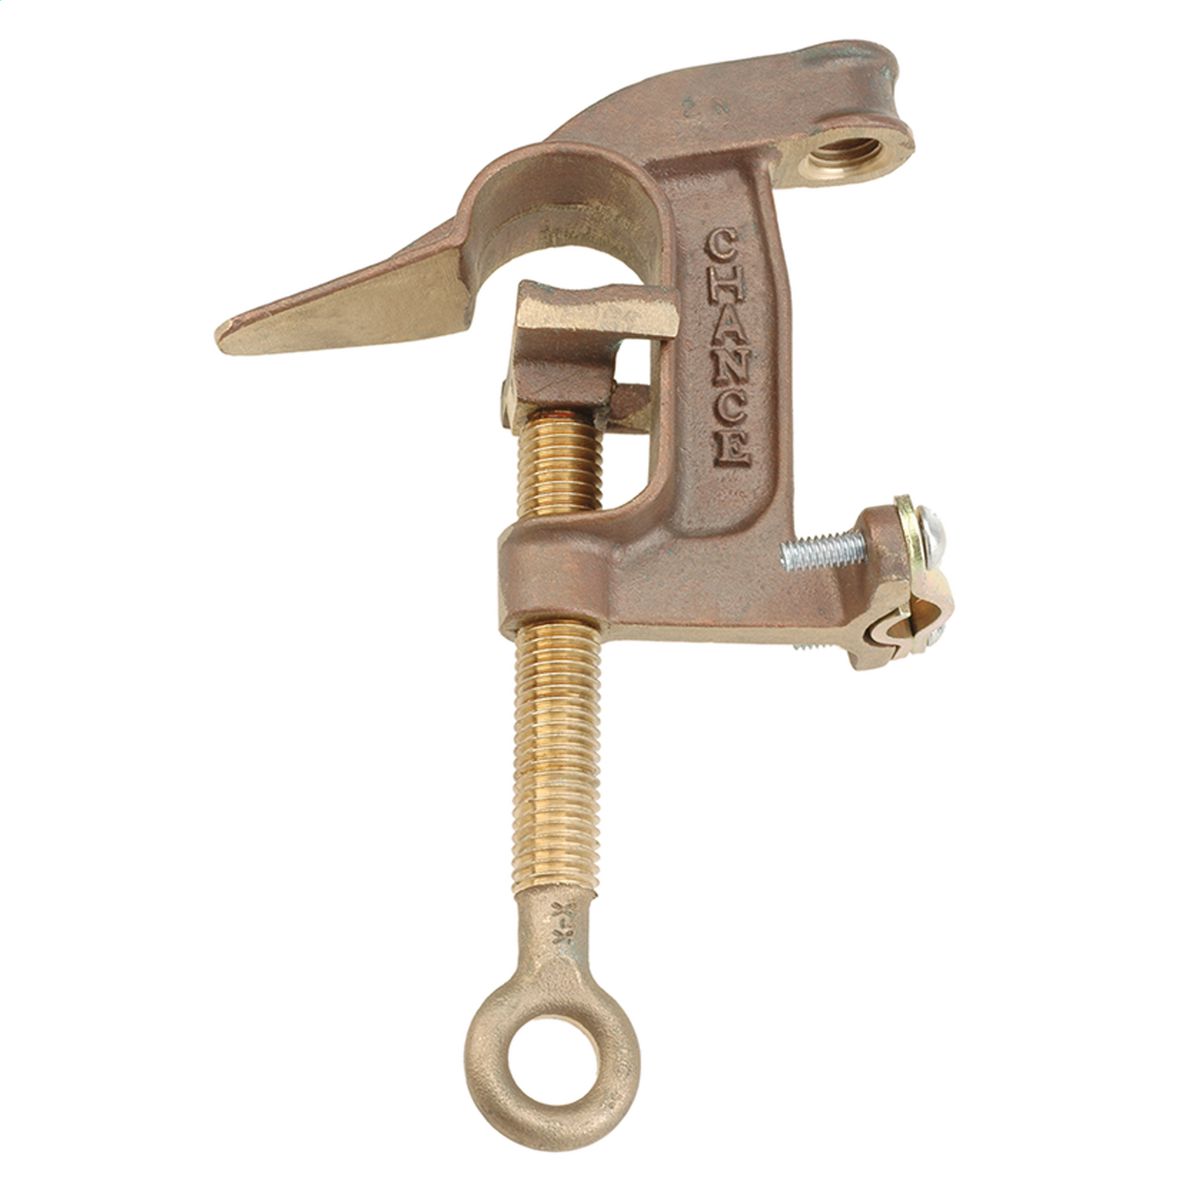 Ground Clamp - C-Type I-A-5 1.25" Jaw Opening | C6002271 | Hubbell